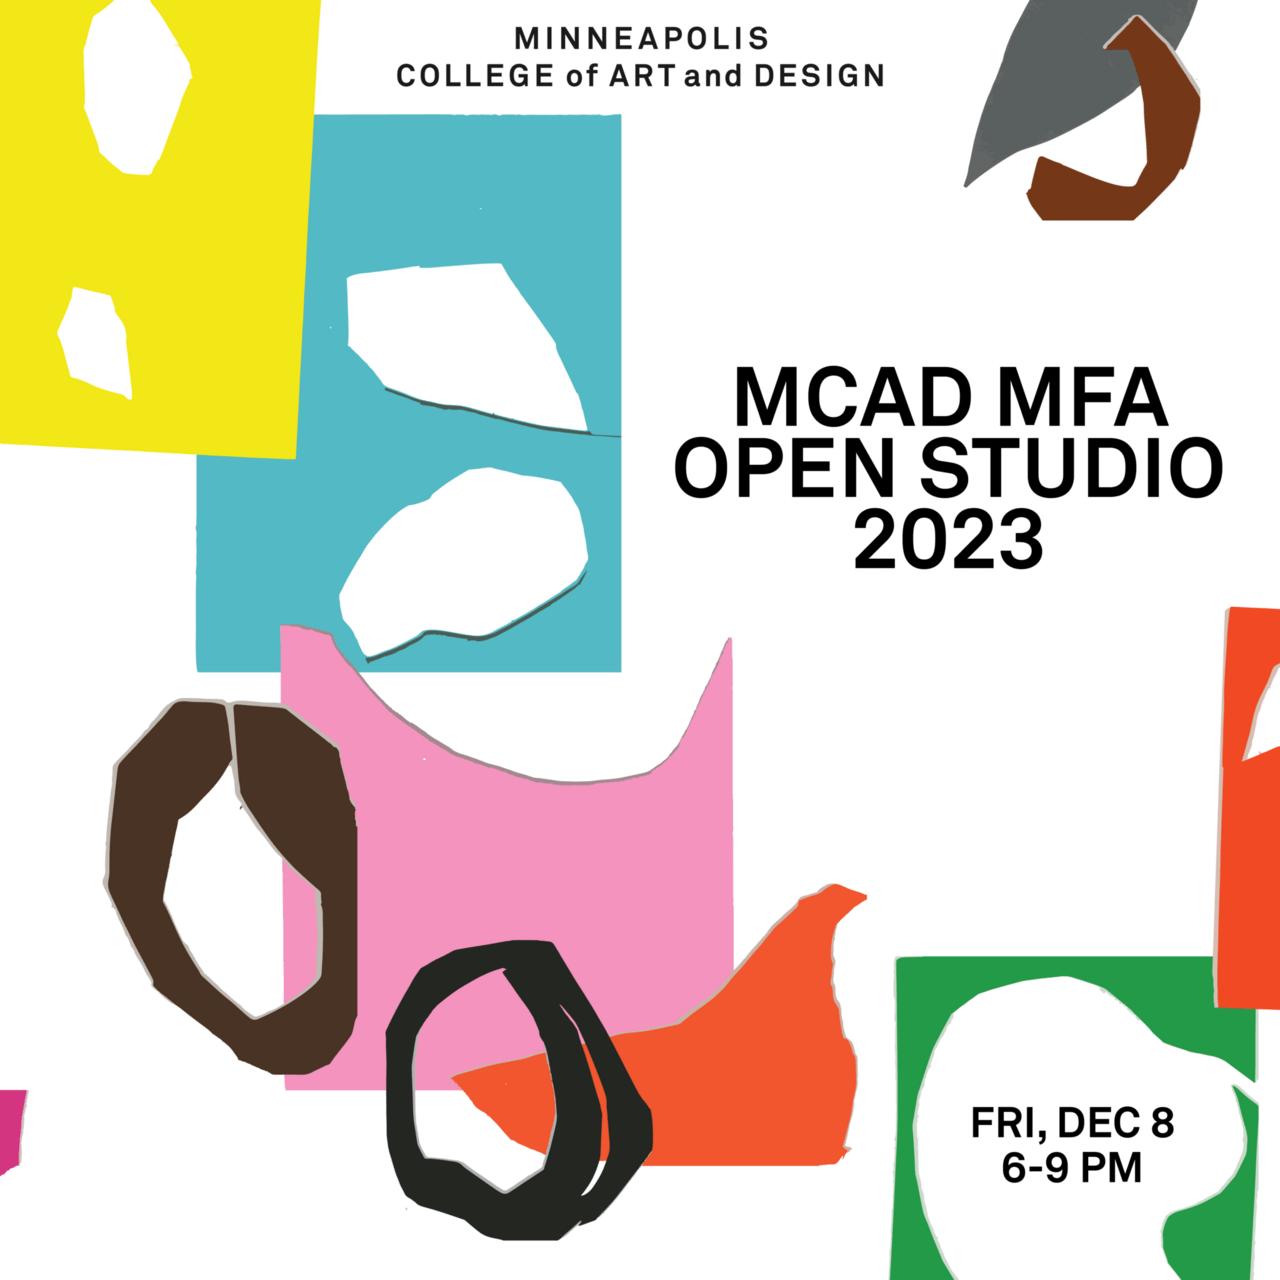 A poster promoting MCAD MFA's 2023 Open Studio.